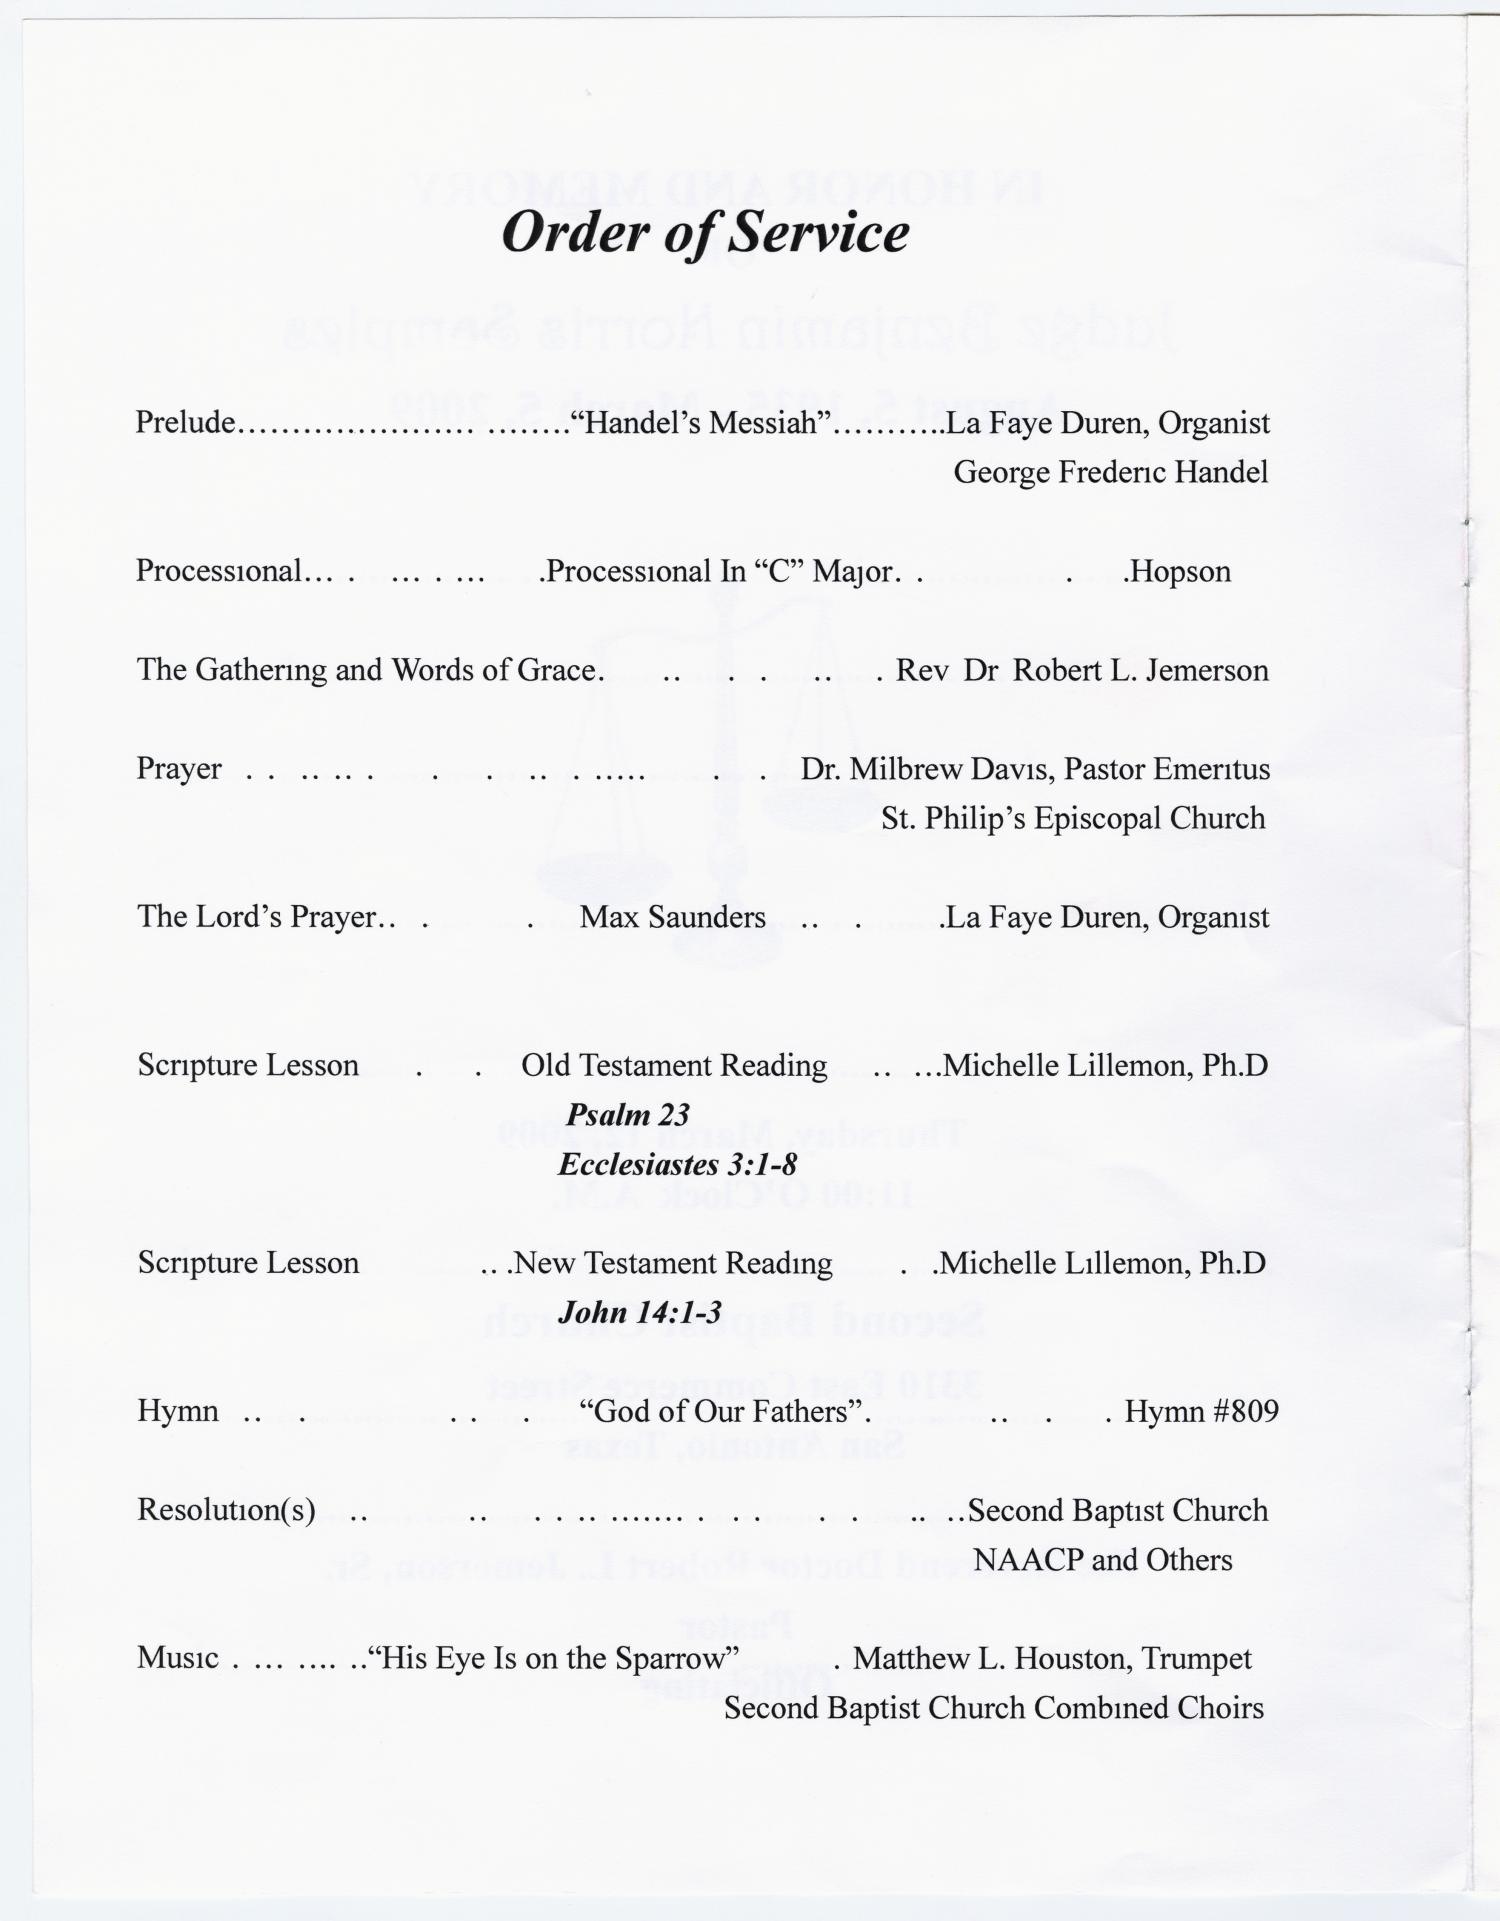 [Funeral Program for Benjamin Norris Samples] - Page 2 of 10 - The Portal to Texas History1500 x 1921